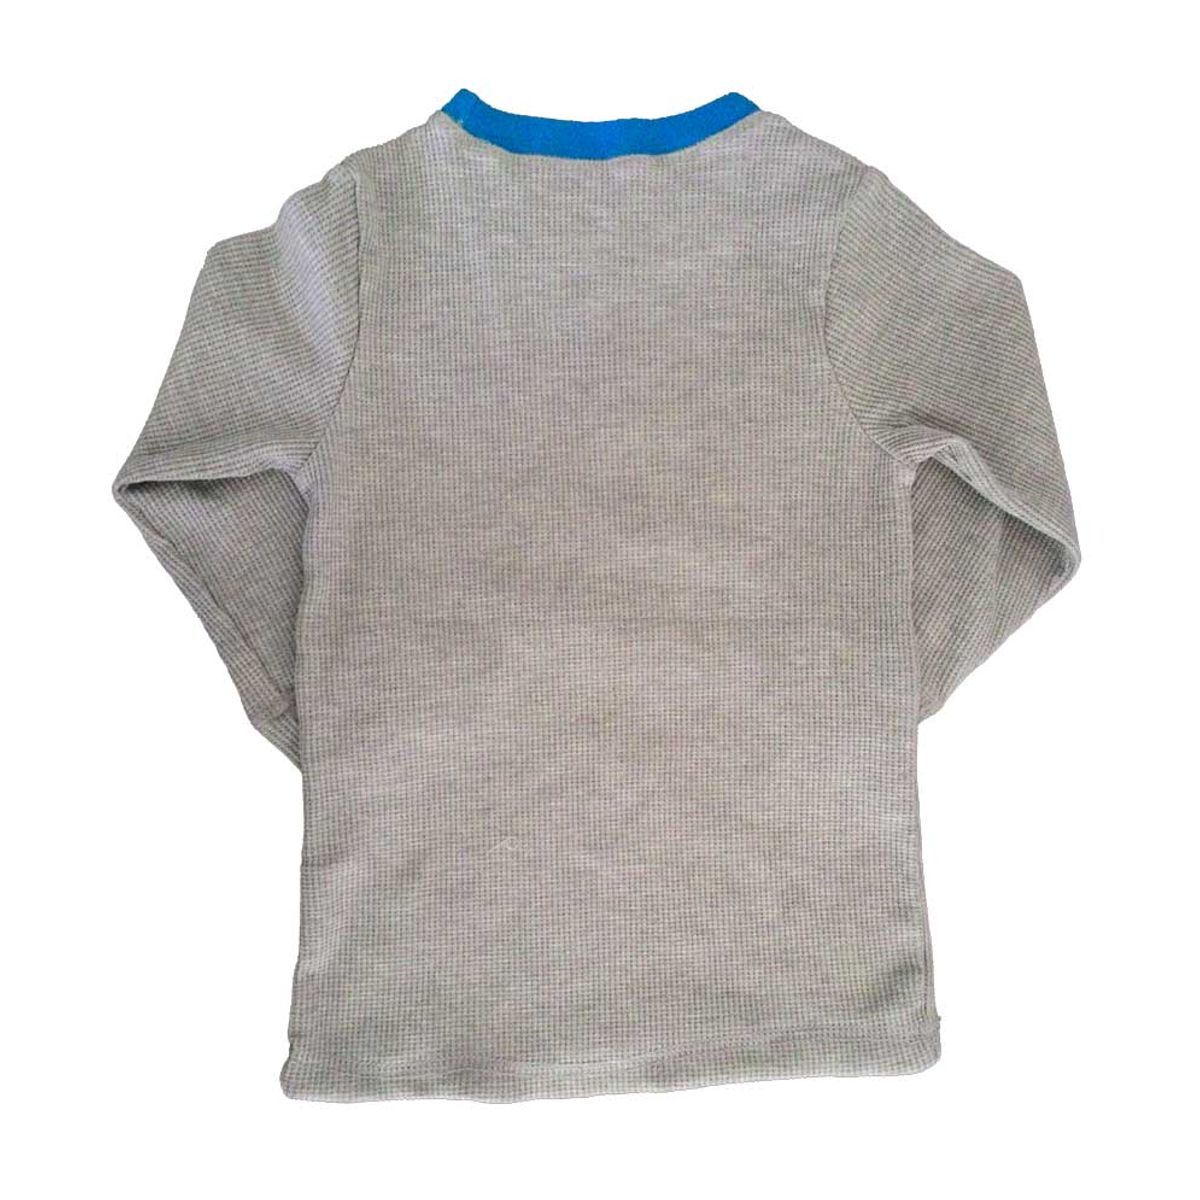 Buy Cool Club Pure Cotton Baby Boys T-Shirt at Lowest Price ...